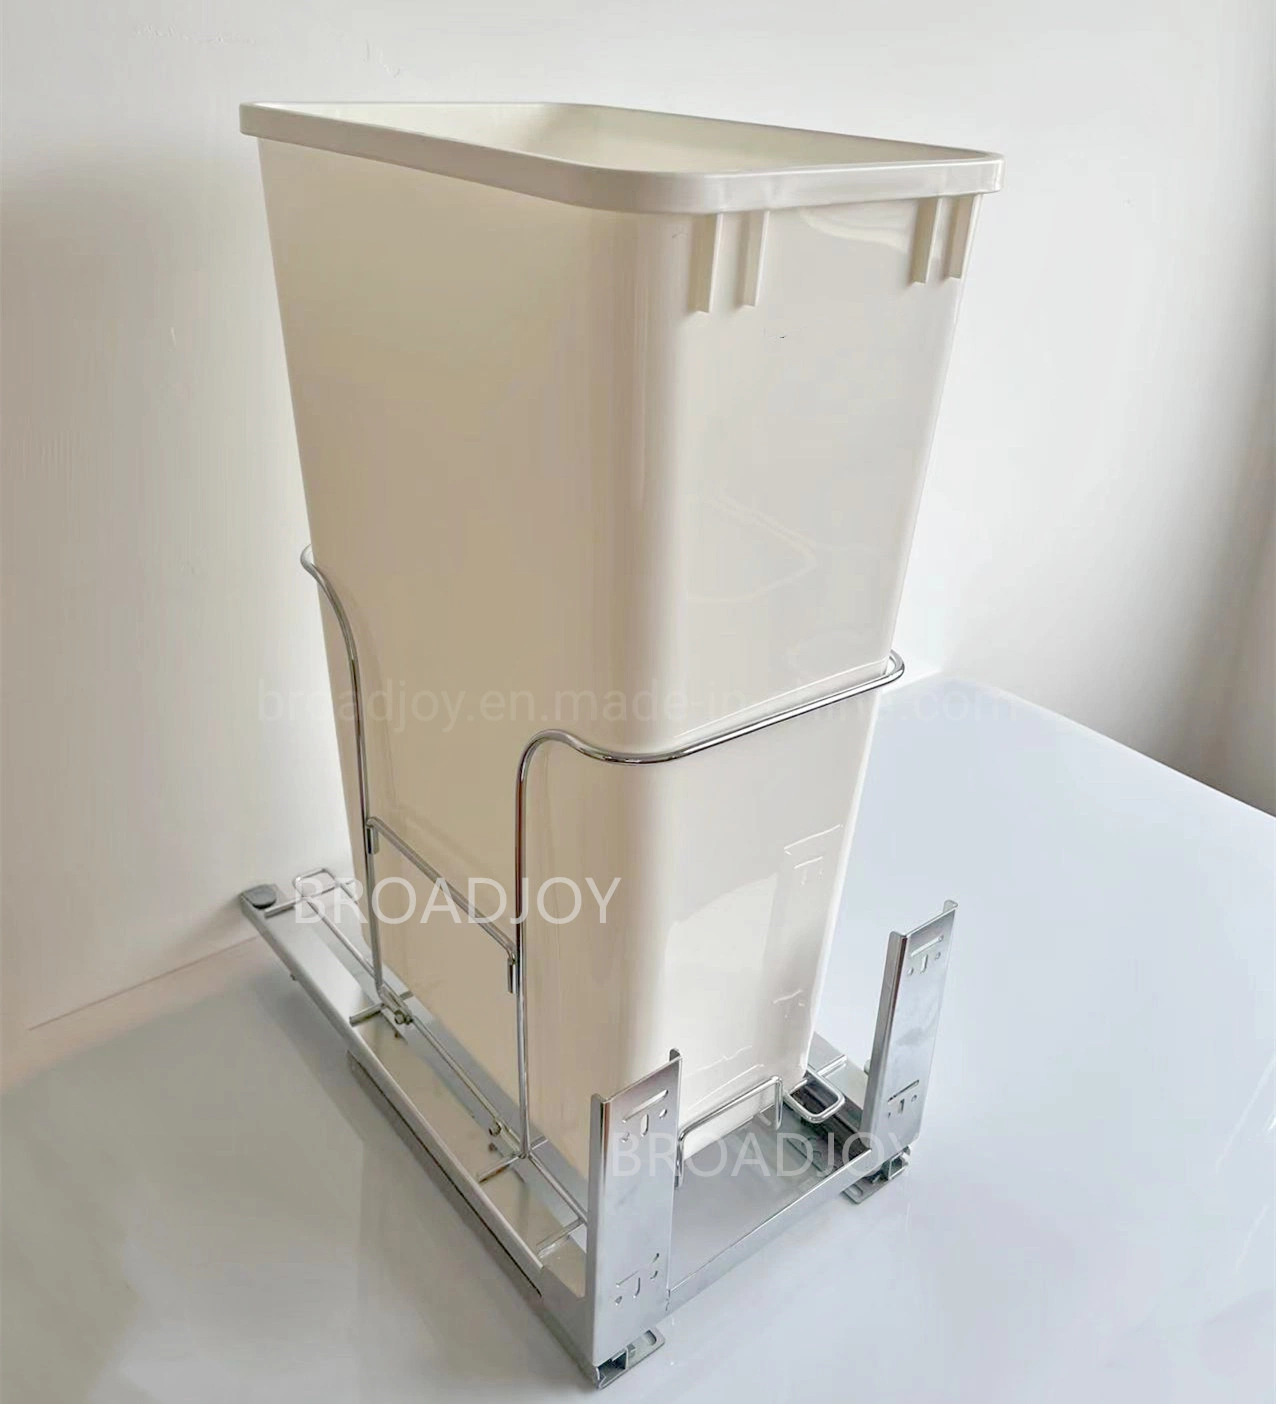 Door Mounted Pull-out Waste Bin 35L Recycling Kitchen Cabinet Garbage Bin